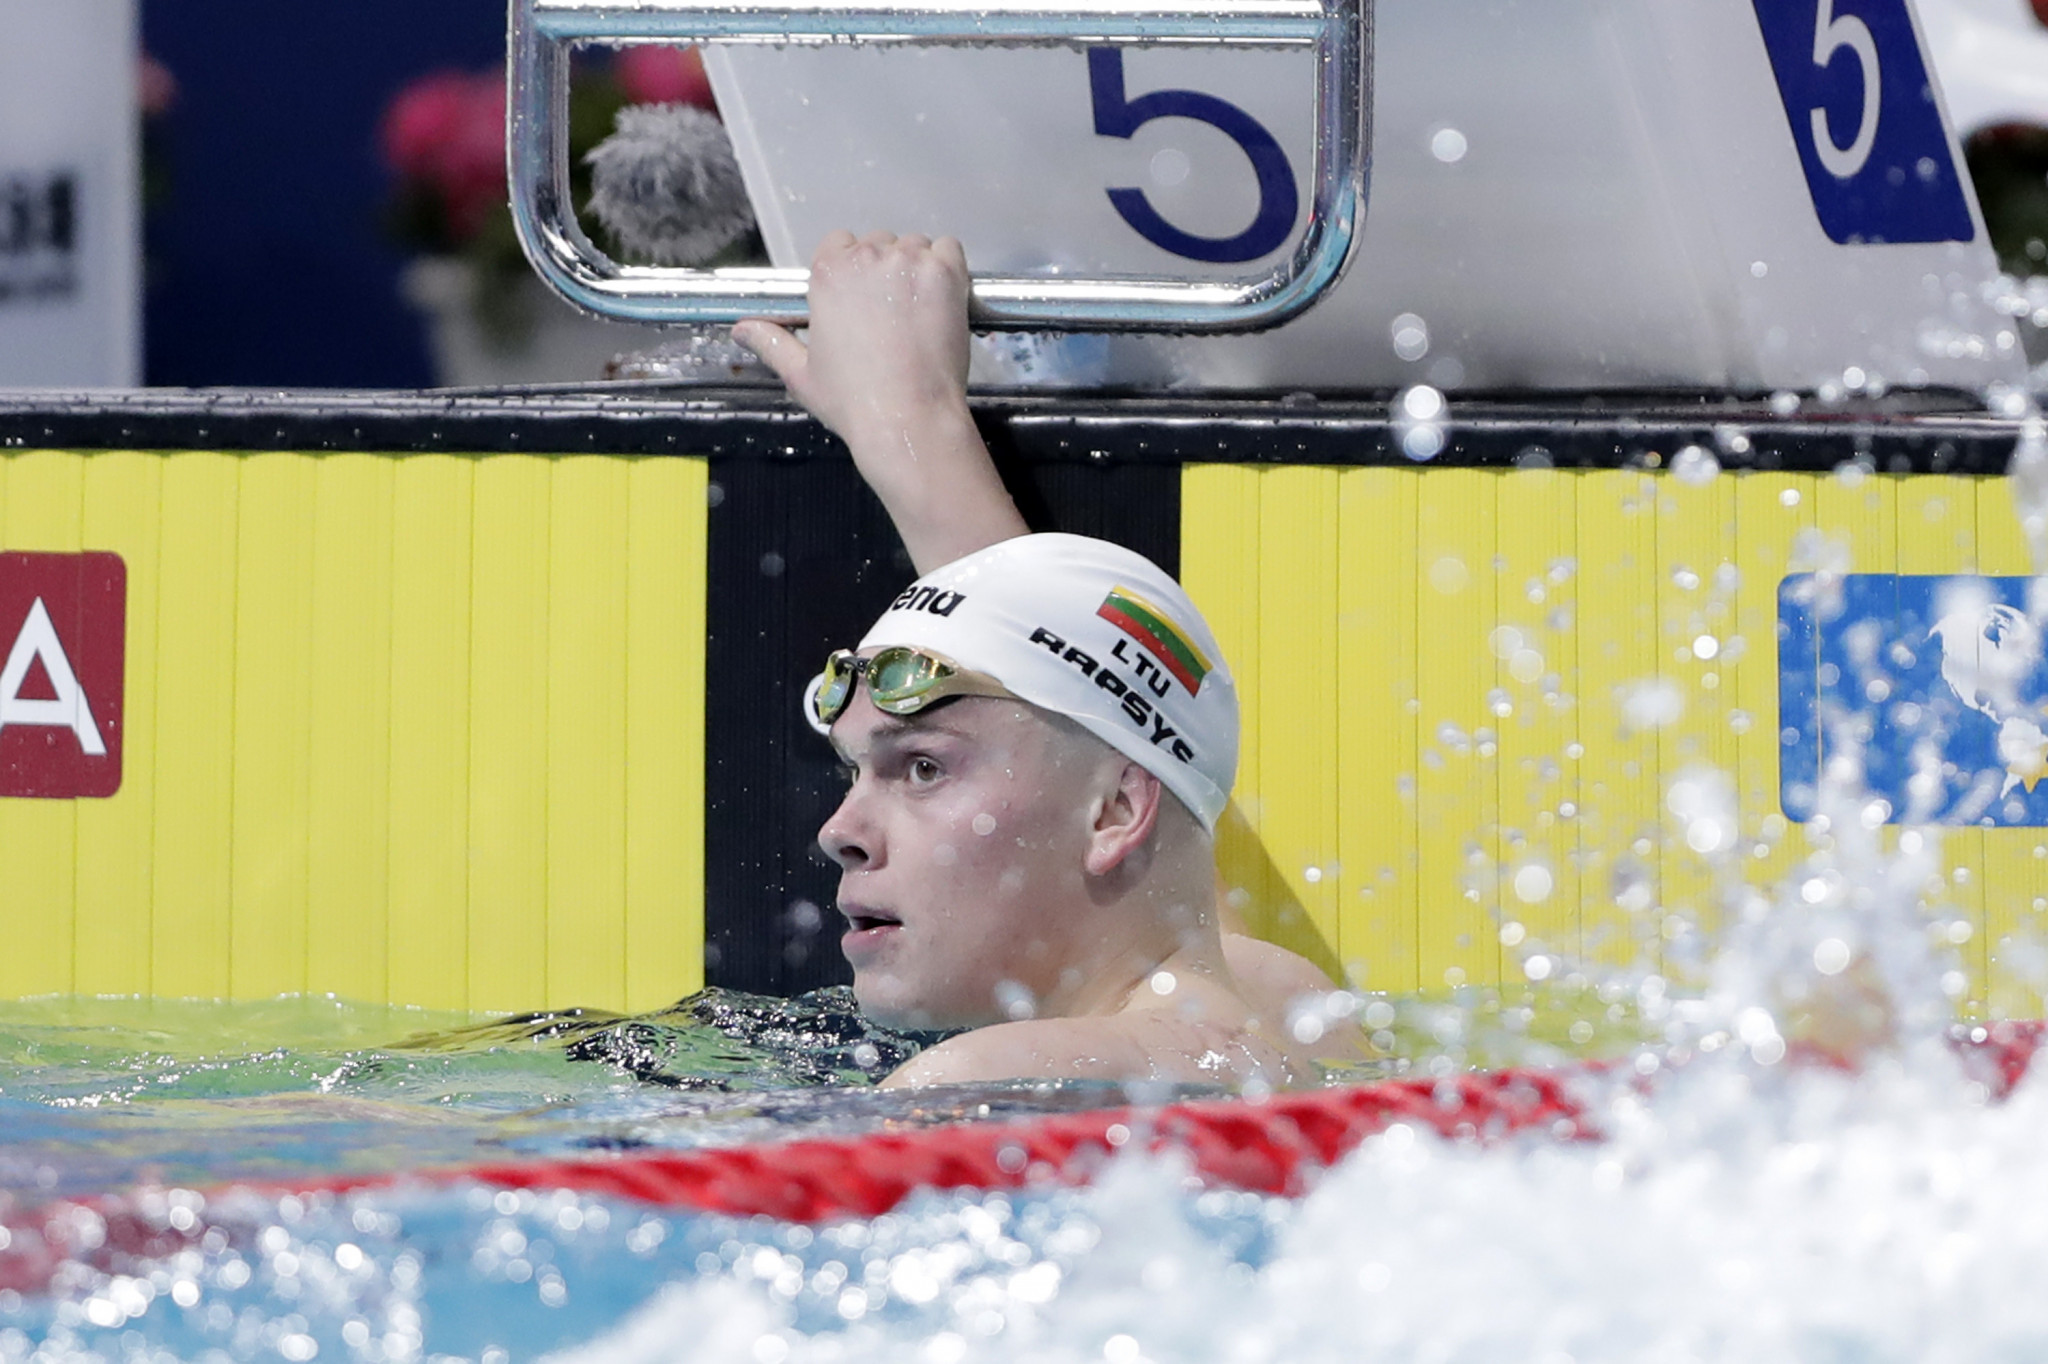 Lithuania's Rapšys among three FINA World Cup record breakers on day one in Tokyo